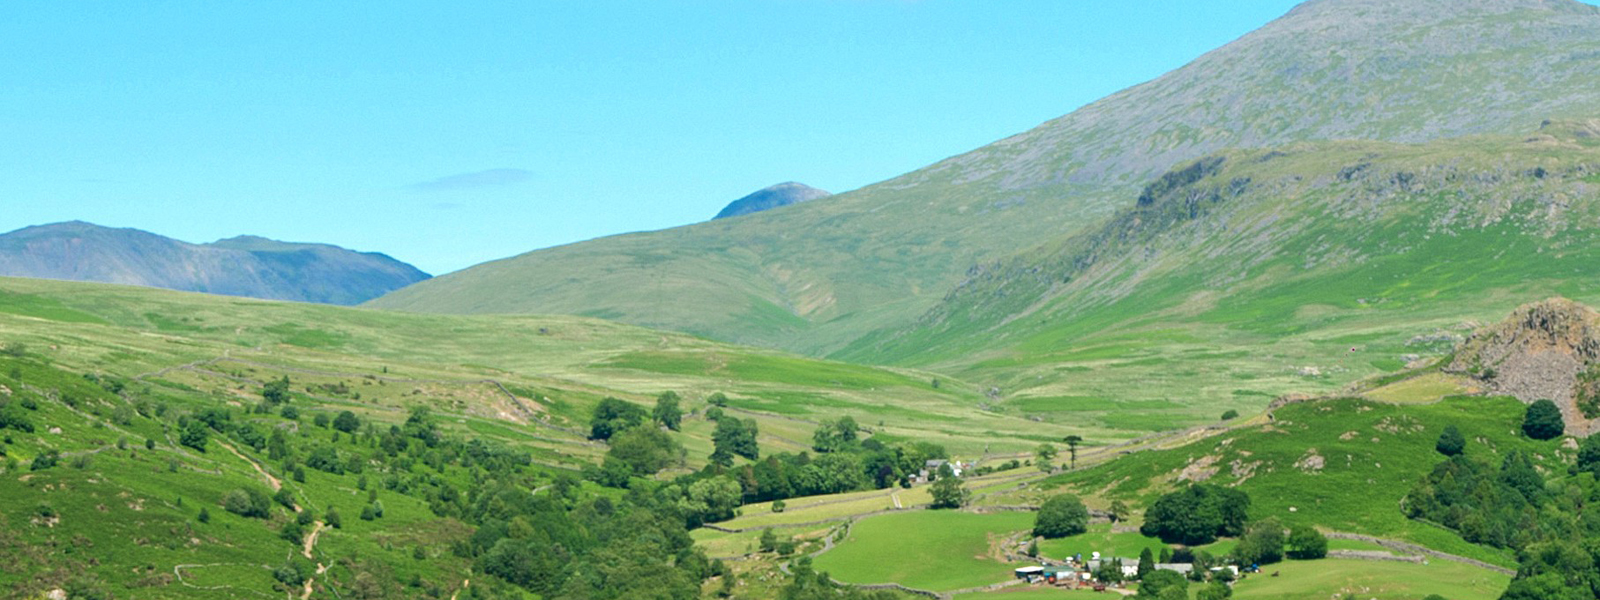 Explore the less trodden path up Scafell, England's second highest mountain